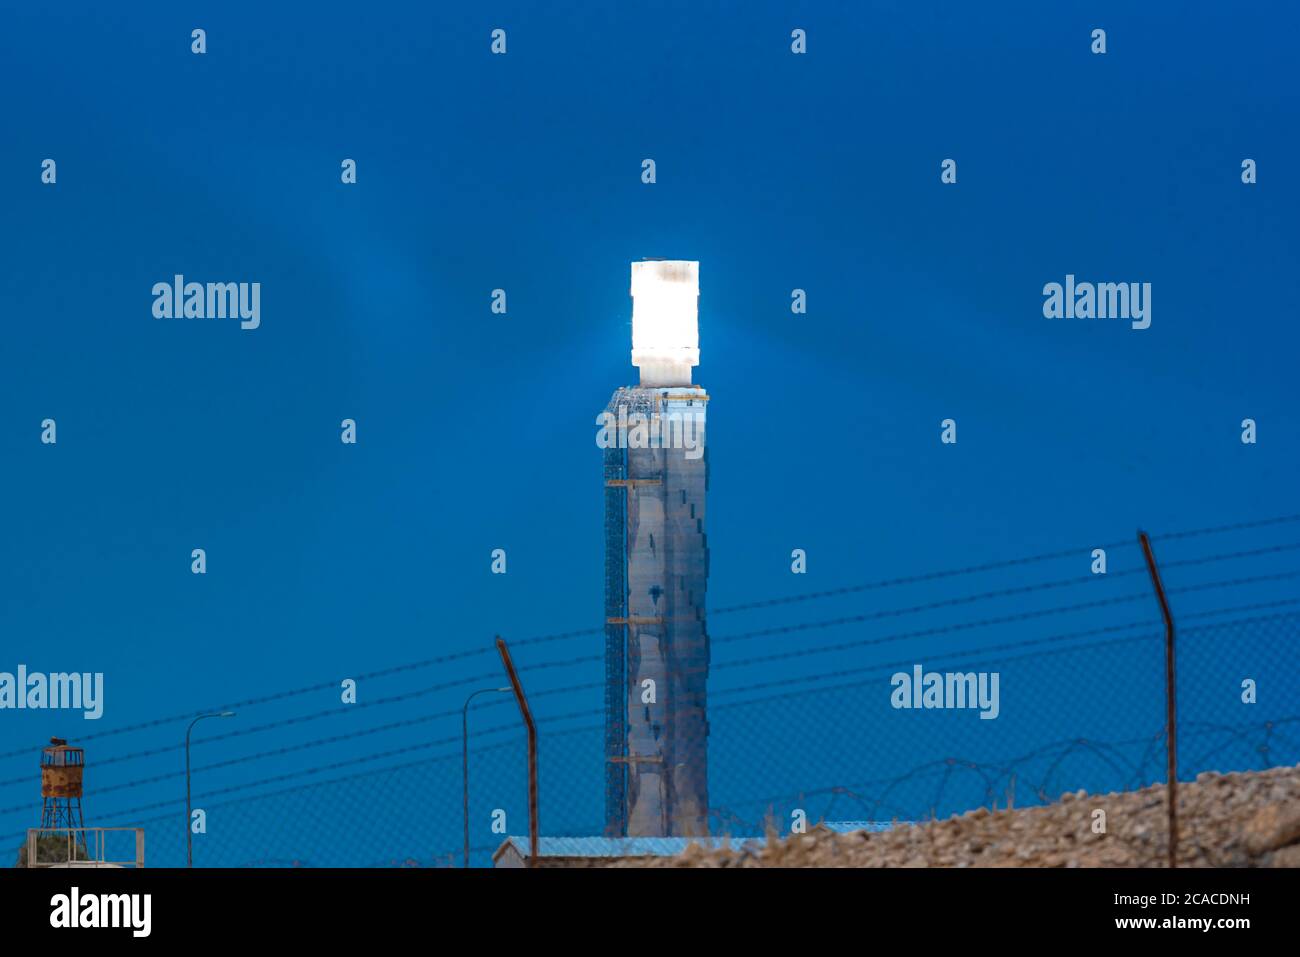 The collection station at the Ashalim Solar Power station is a solar thermal power station in the Negev desert near the kibbutz Ashalim, in Israel. Th Stock Photo